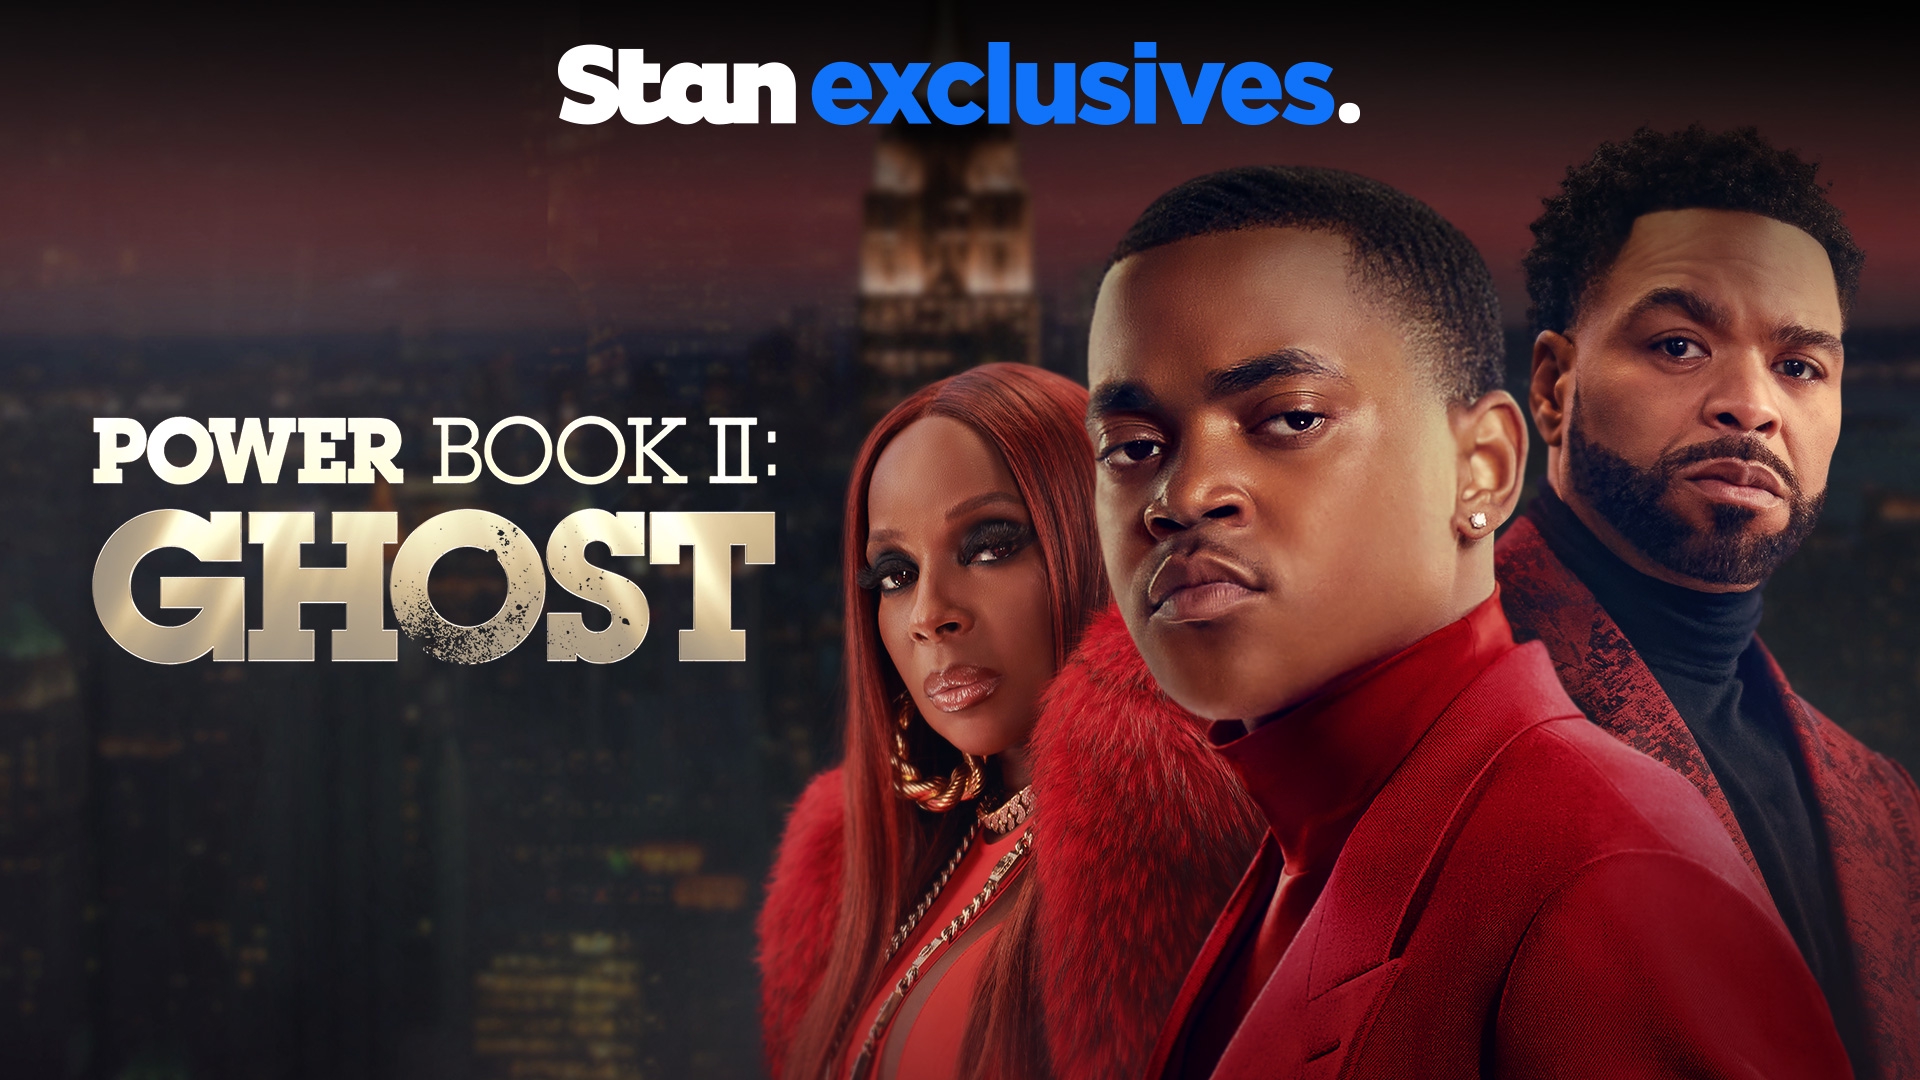 Power Book II: Ghost Trailer Features the Return of 50 Cent